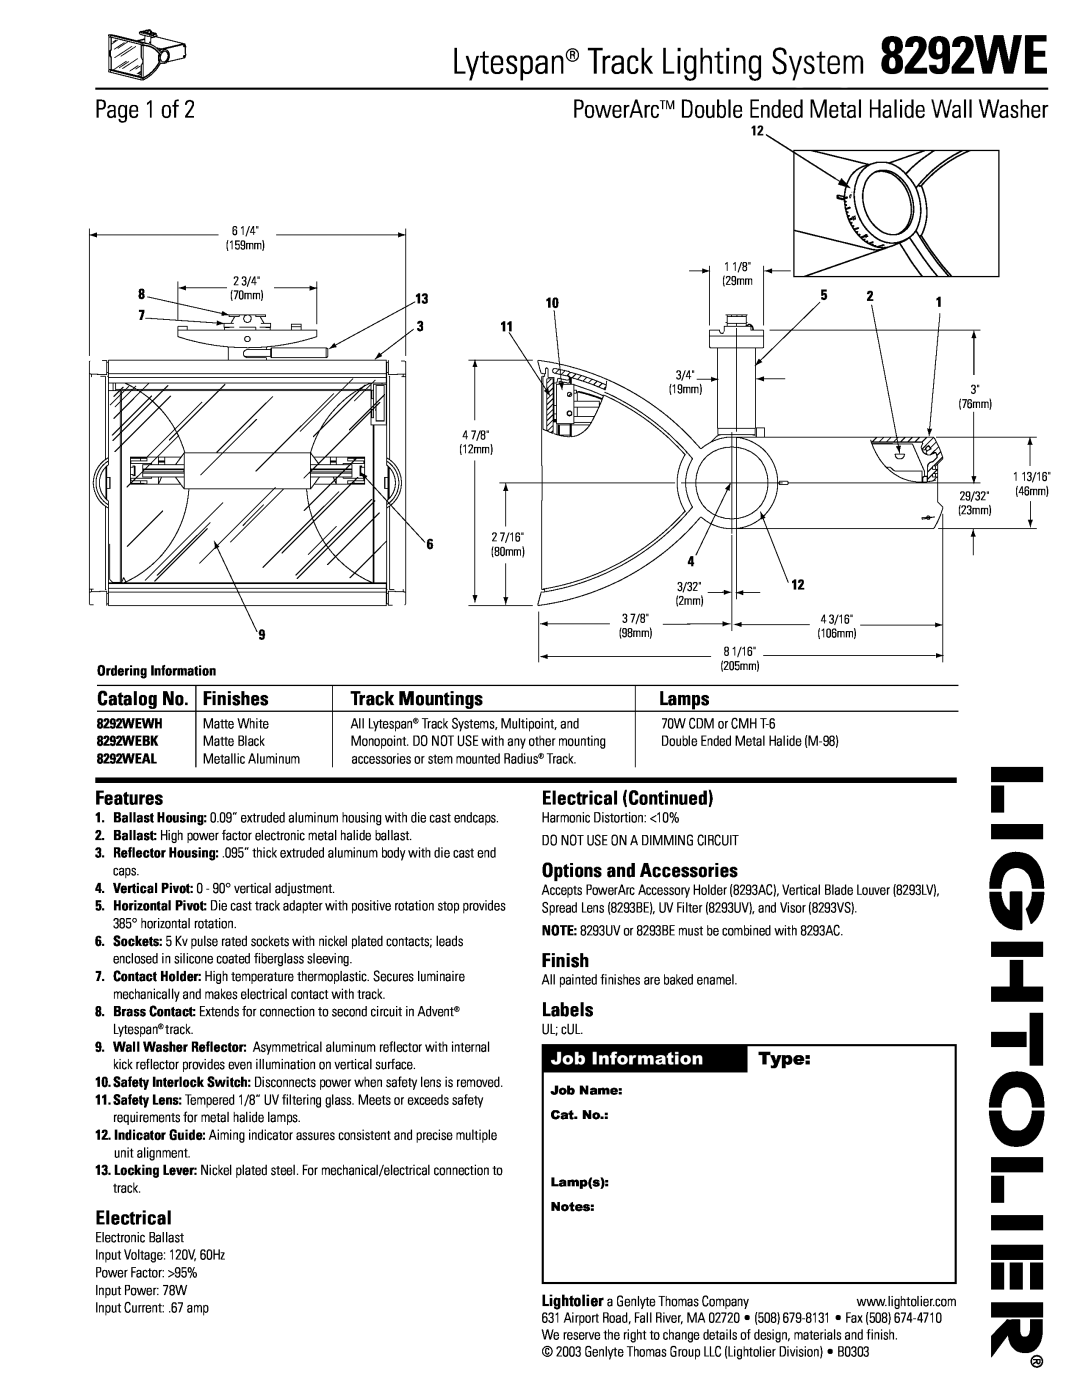 Lightolier manual Lytespan Track Lighting System 8292WE, Finishes, Track Mountings, Lamps, Features, Electrical, Labels 